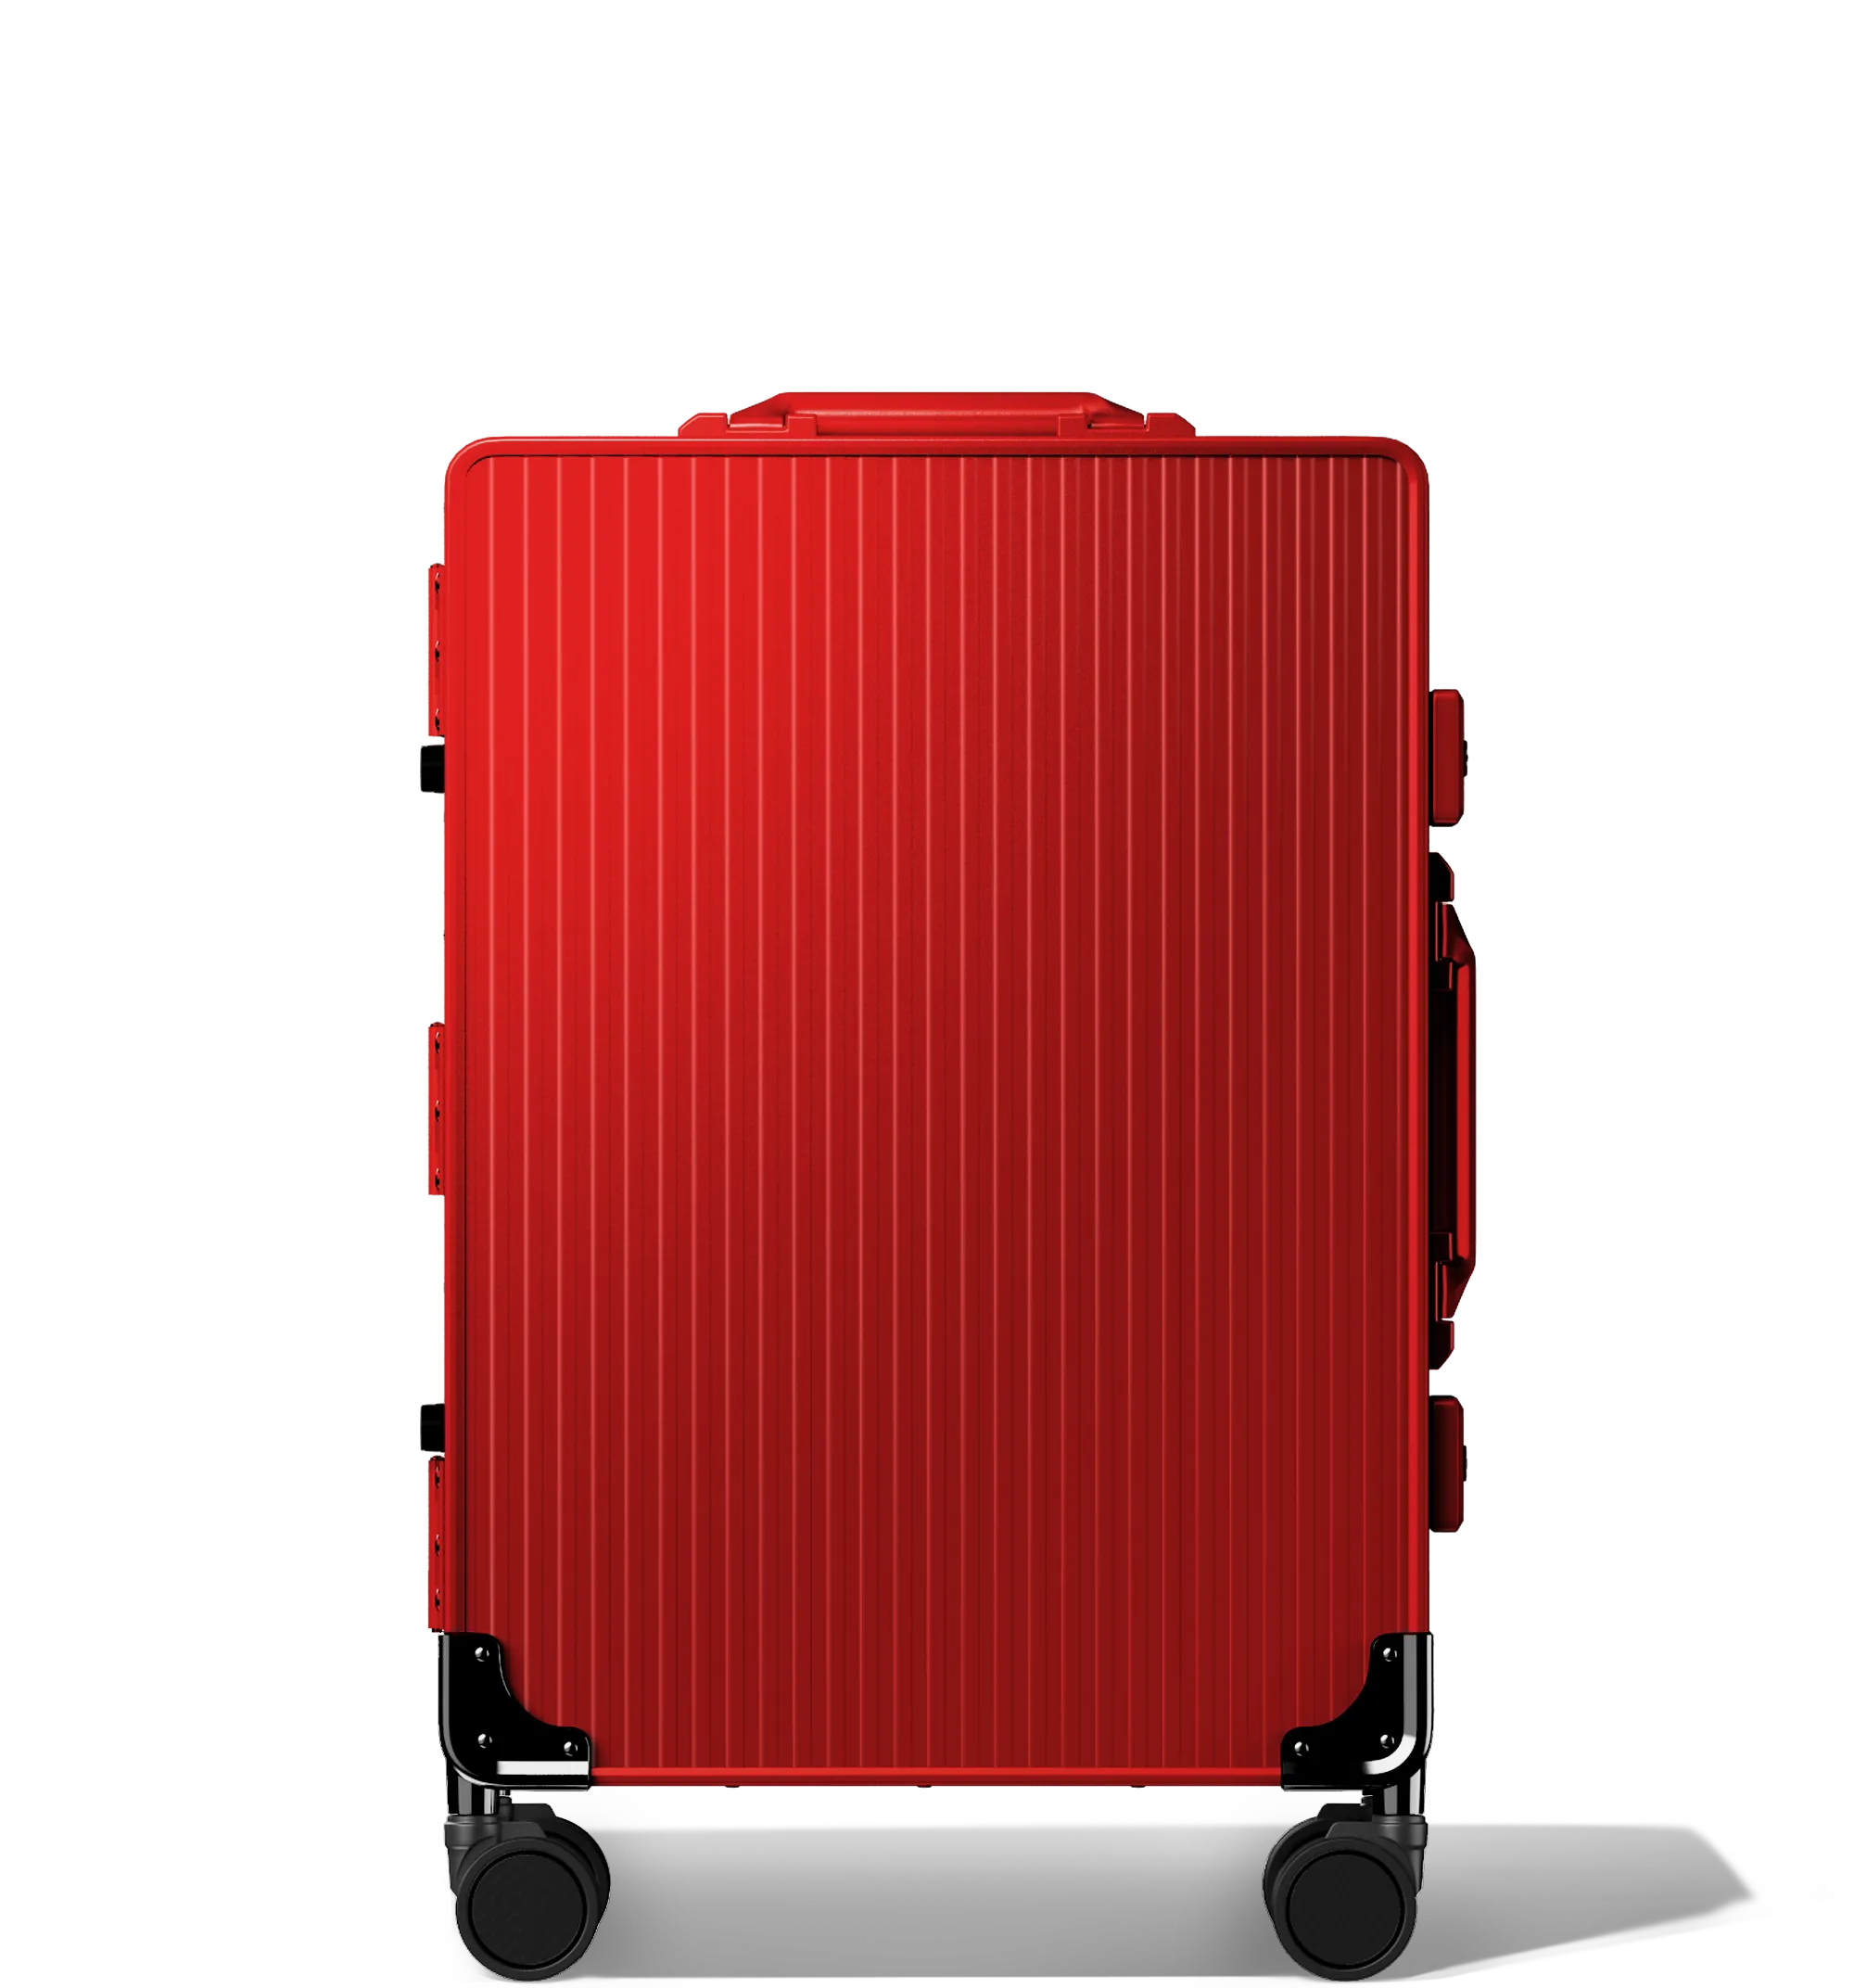 A vertical image of a Cabin in 56/20 luggage , upright, red hard-shell aluminium Luggage with a grooved surface design and multi-directional wheels, shown against a white background.